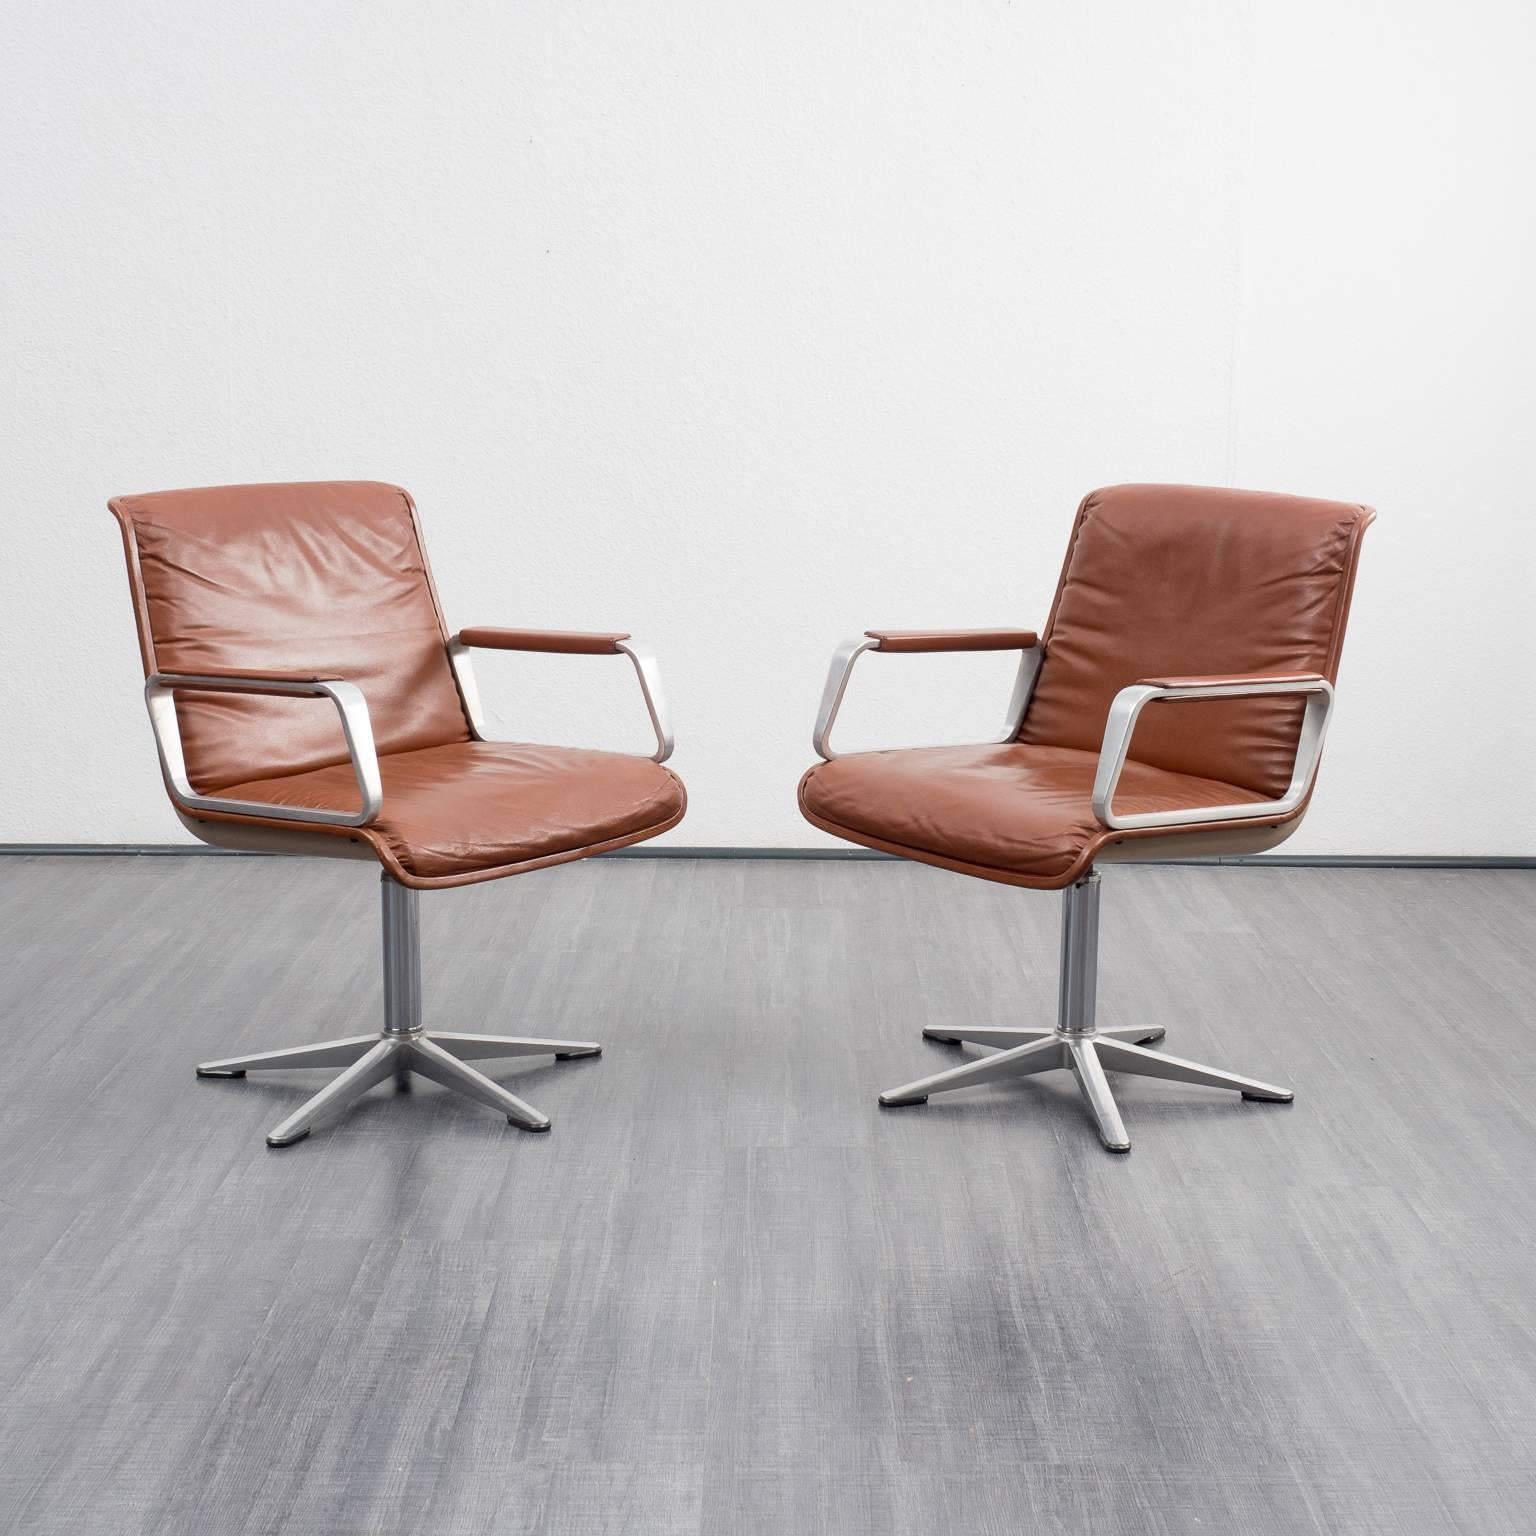 High-quality, rotating executive chair by Wilkhahn after a draft of delta design, 1968, series 2000. Sand-colored plastic seat shell, brushed aluminium casting feet and fawn leather covering.

There are six chairs available.

Good condition with